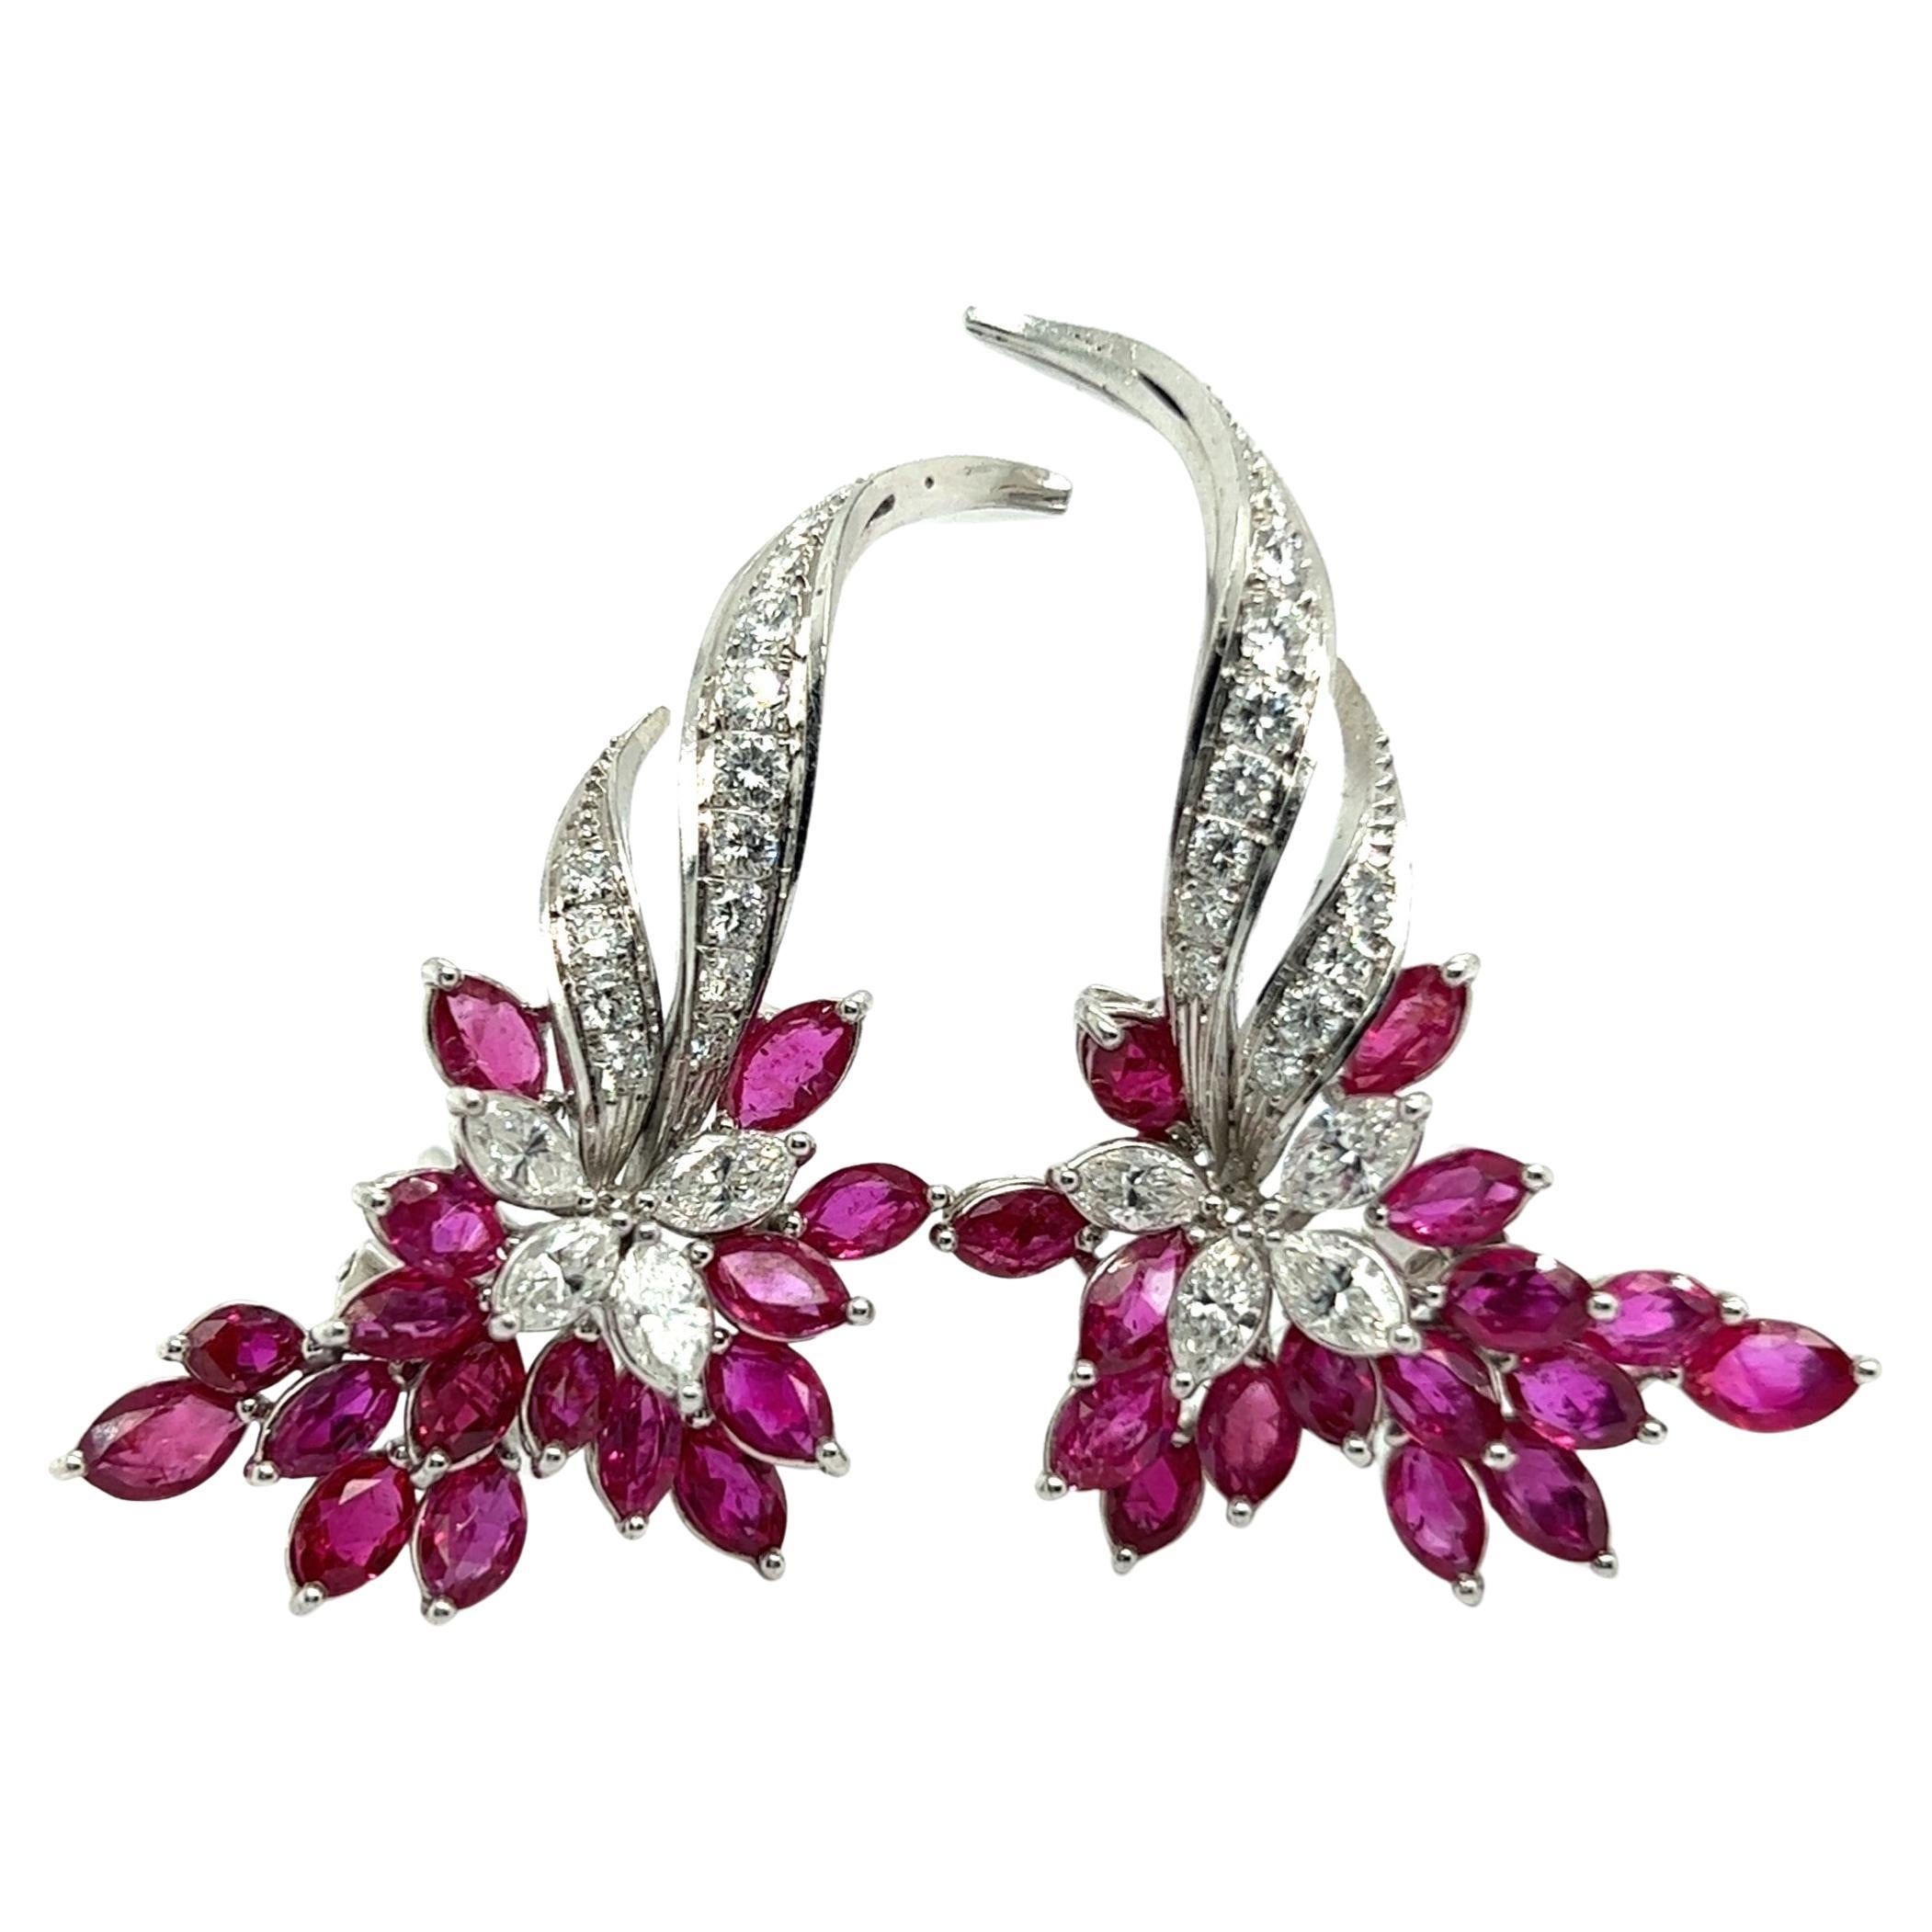 Blossom Clip-on Earrings with Rubies & Diamonds in 18 Karat White Gold